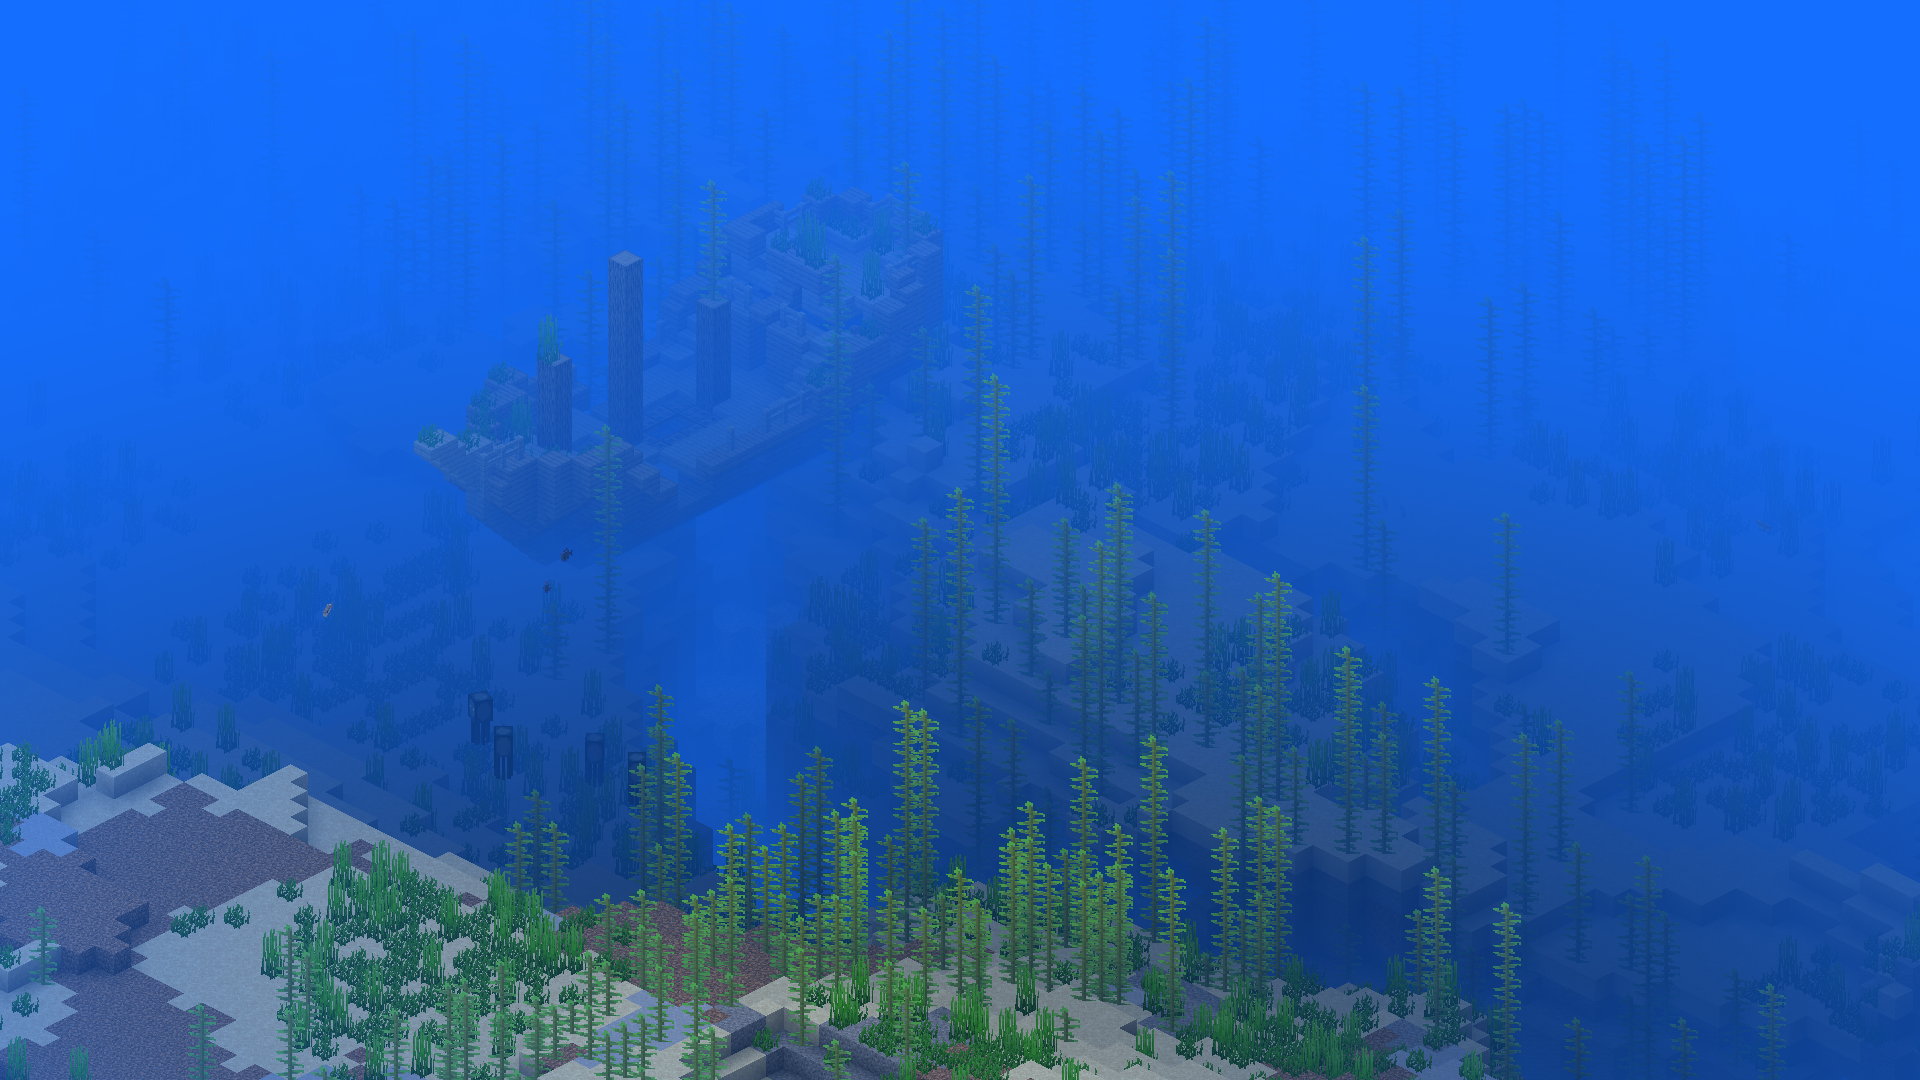 MINECRAFT, LE GUIDE OCEANS